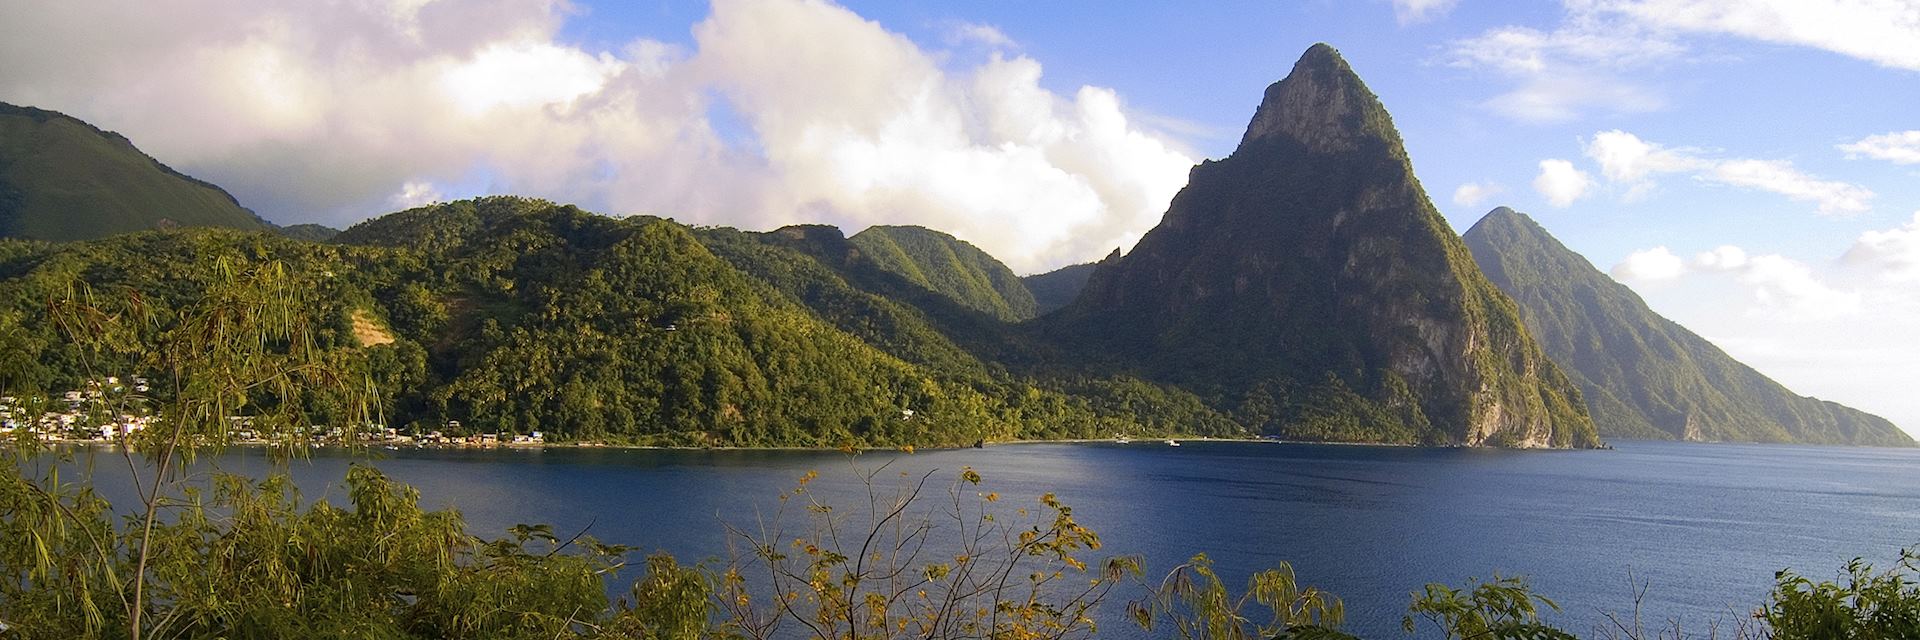 Inland scenery on St Lucia